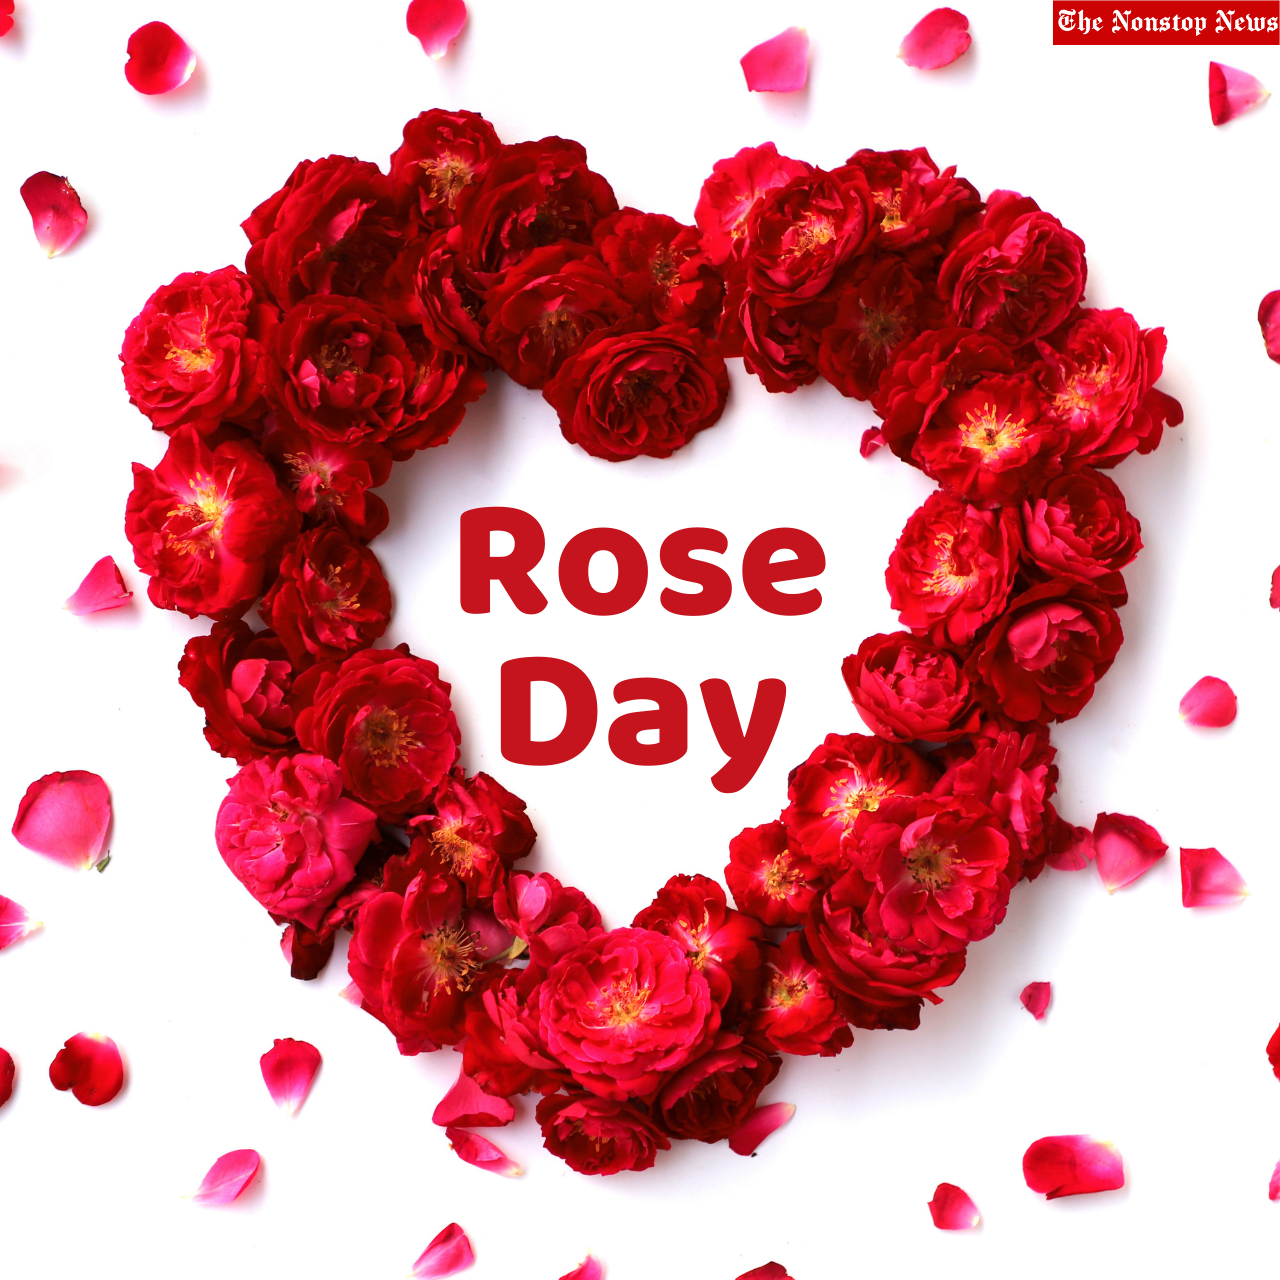 Rose Day 2022: Wishes, Quotes, HD Images, Messages, Status, Shayari to greet your love on the 1st day of Valentine's week